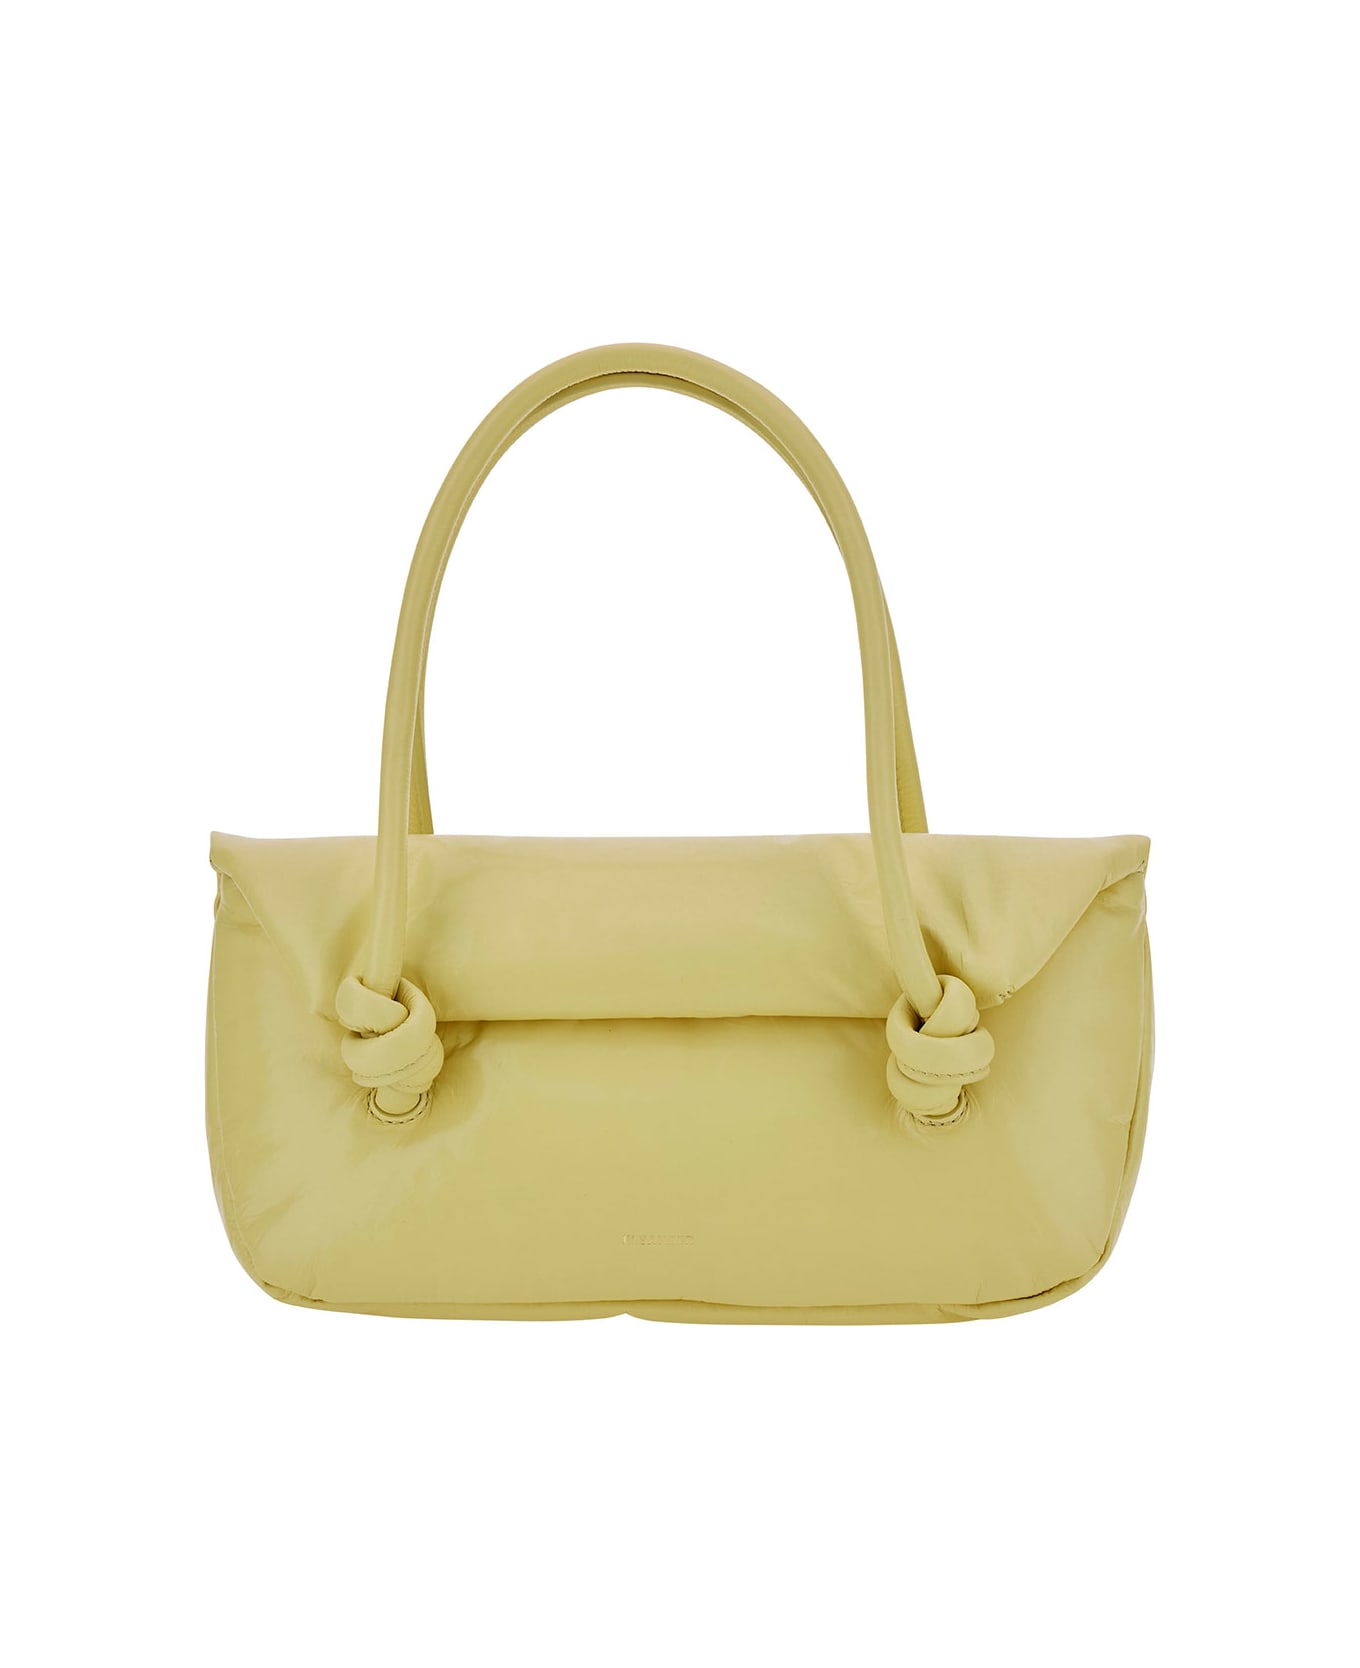 Jil Sander 'knot Small' Yellow Shoulder Bag With Laminated Logo In Patent Leather Woman - Yellow